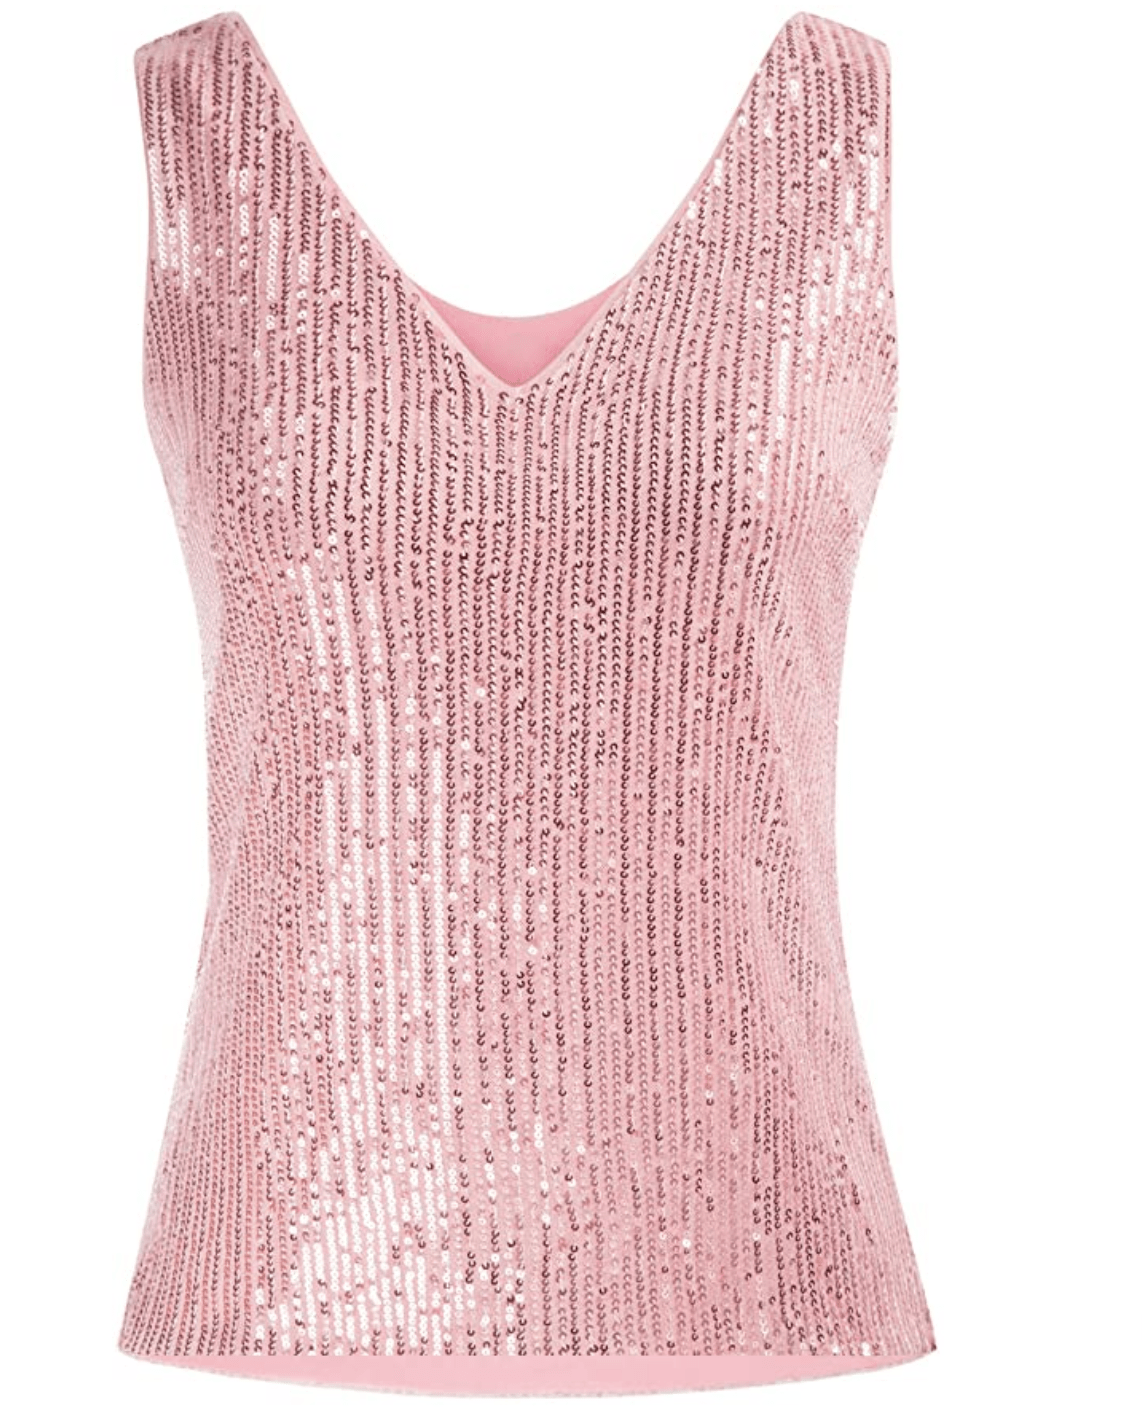 Top Fashion pink sequin tank top